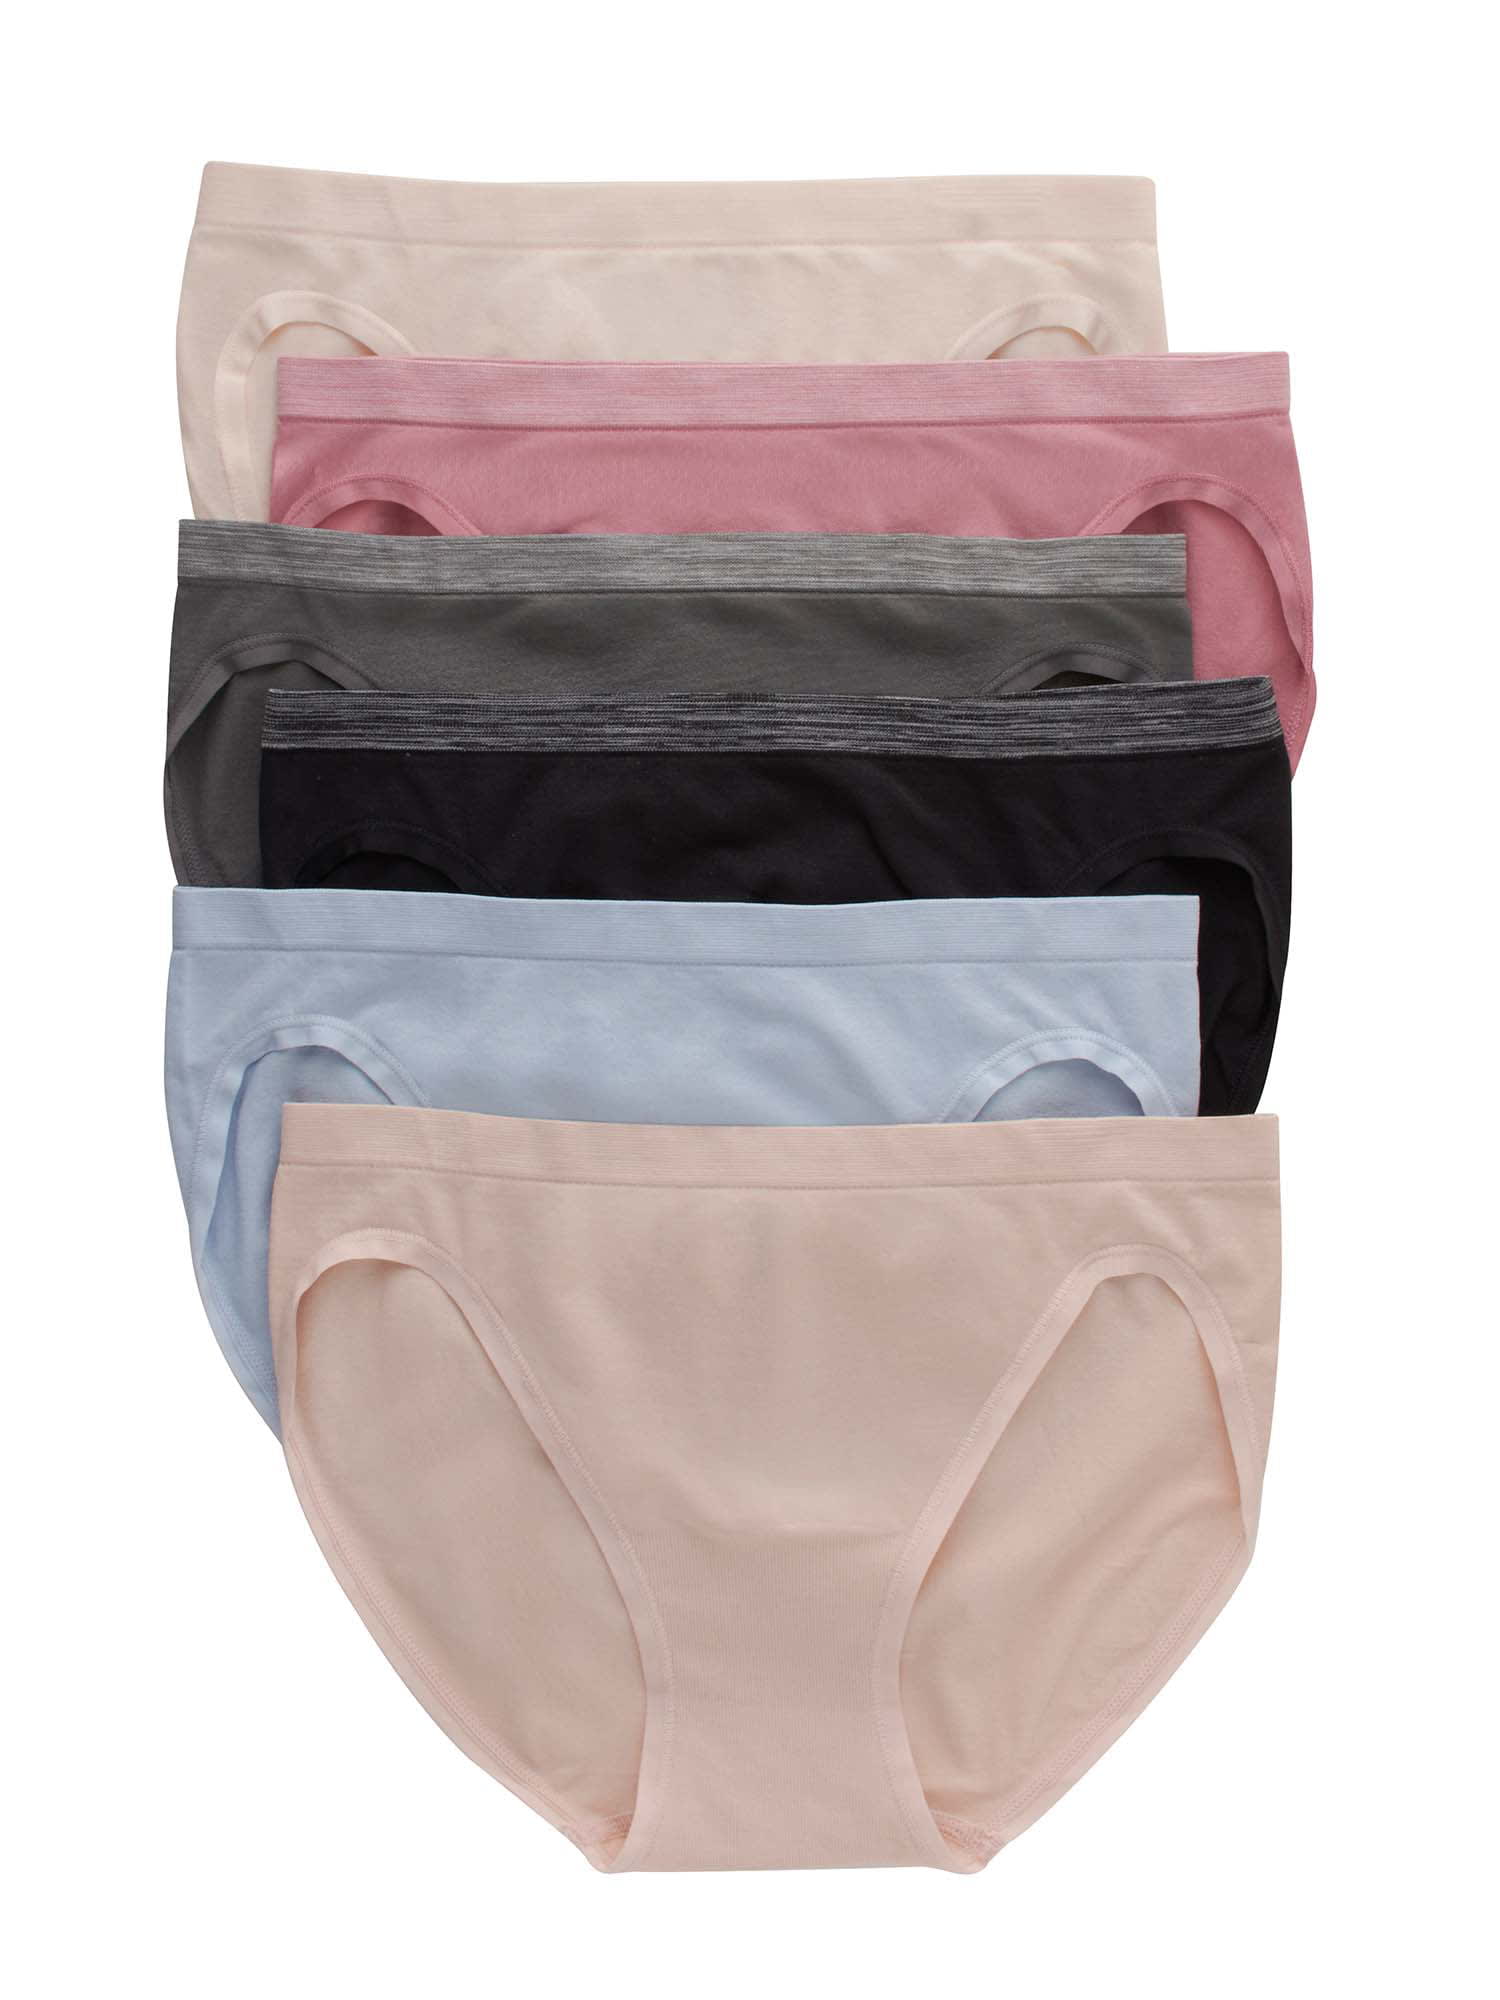 Fruit of the Loom Women's Beyondsoft Bikini Underwear, 6 Pack, Sizes S-2XL  - DroneUp Delivery